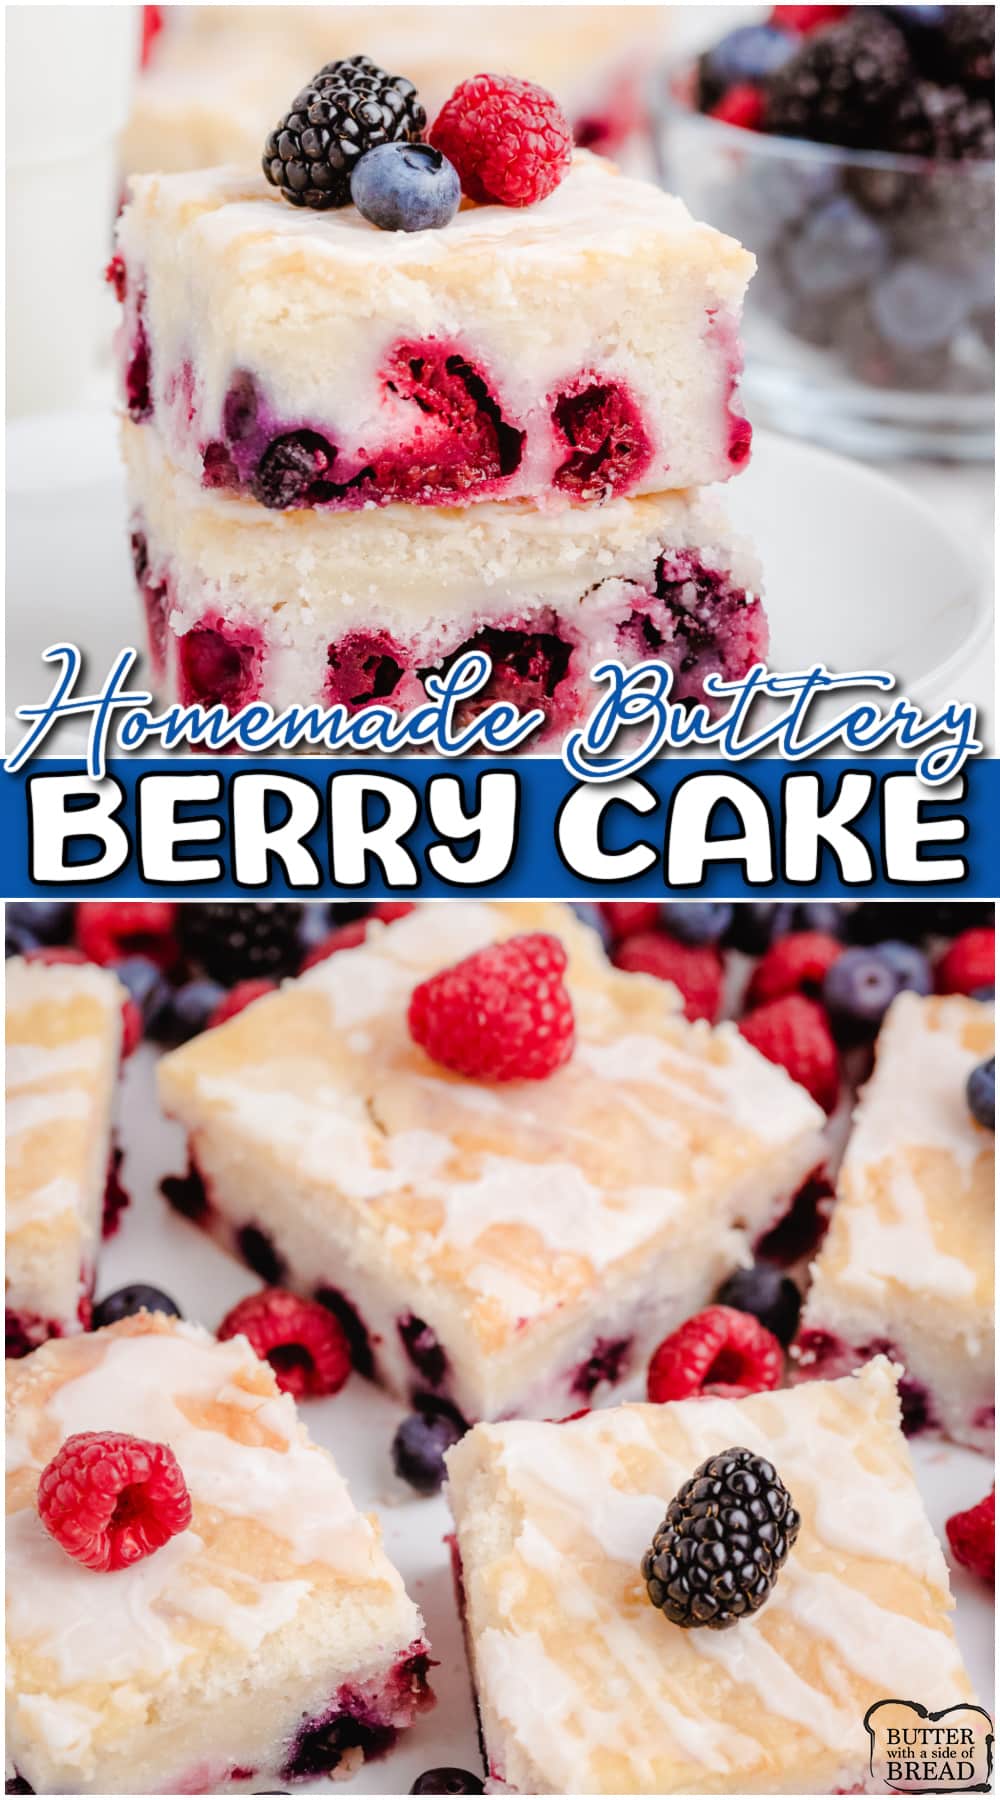 Easy Berry Cake made from scratch with pantry ingredients + fresh berries! Simple berry cake recipe topped with a lovely vanilla almond glaze!